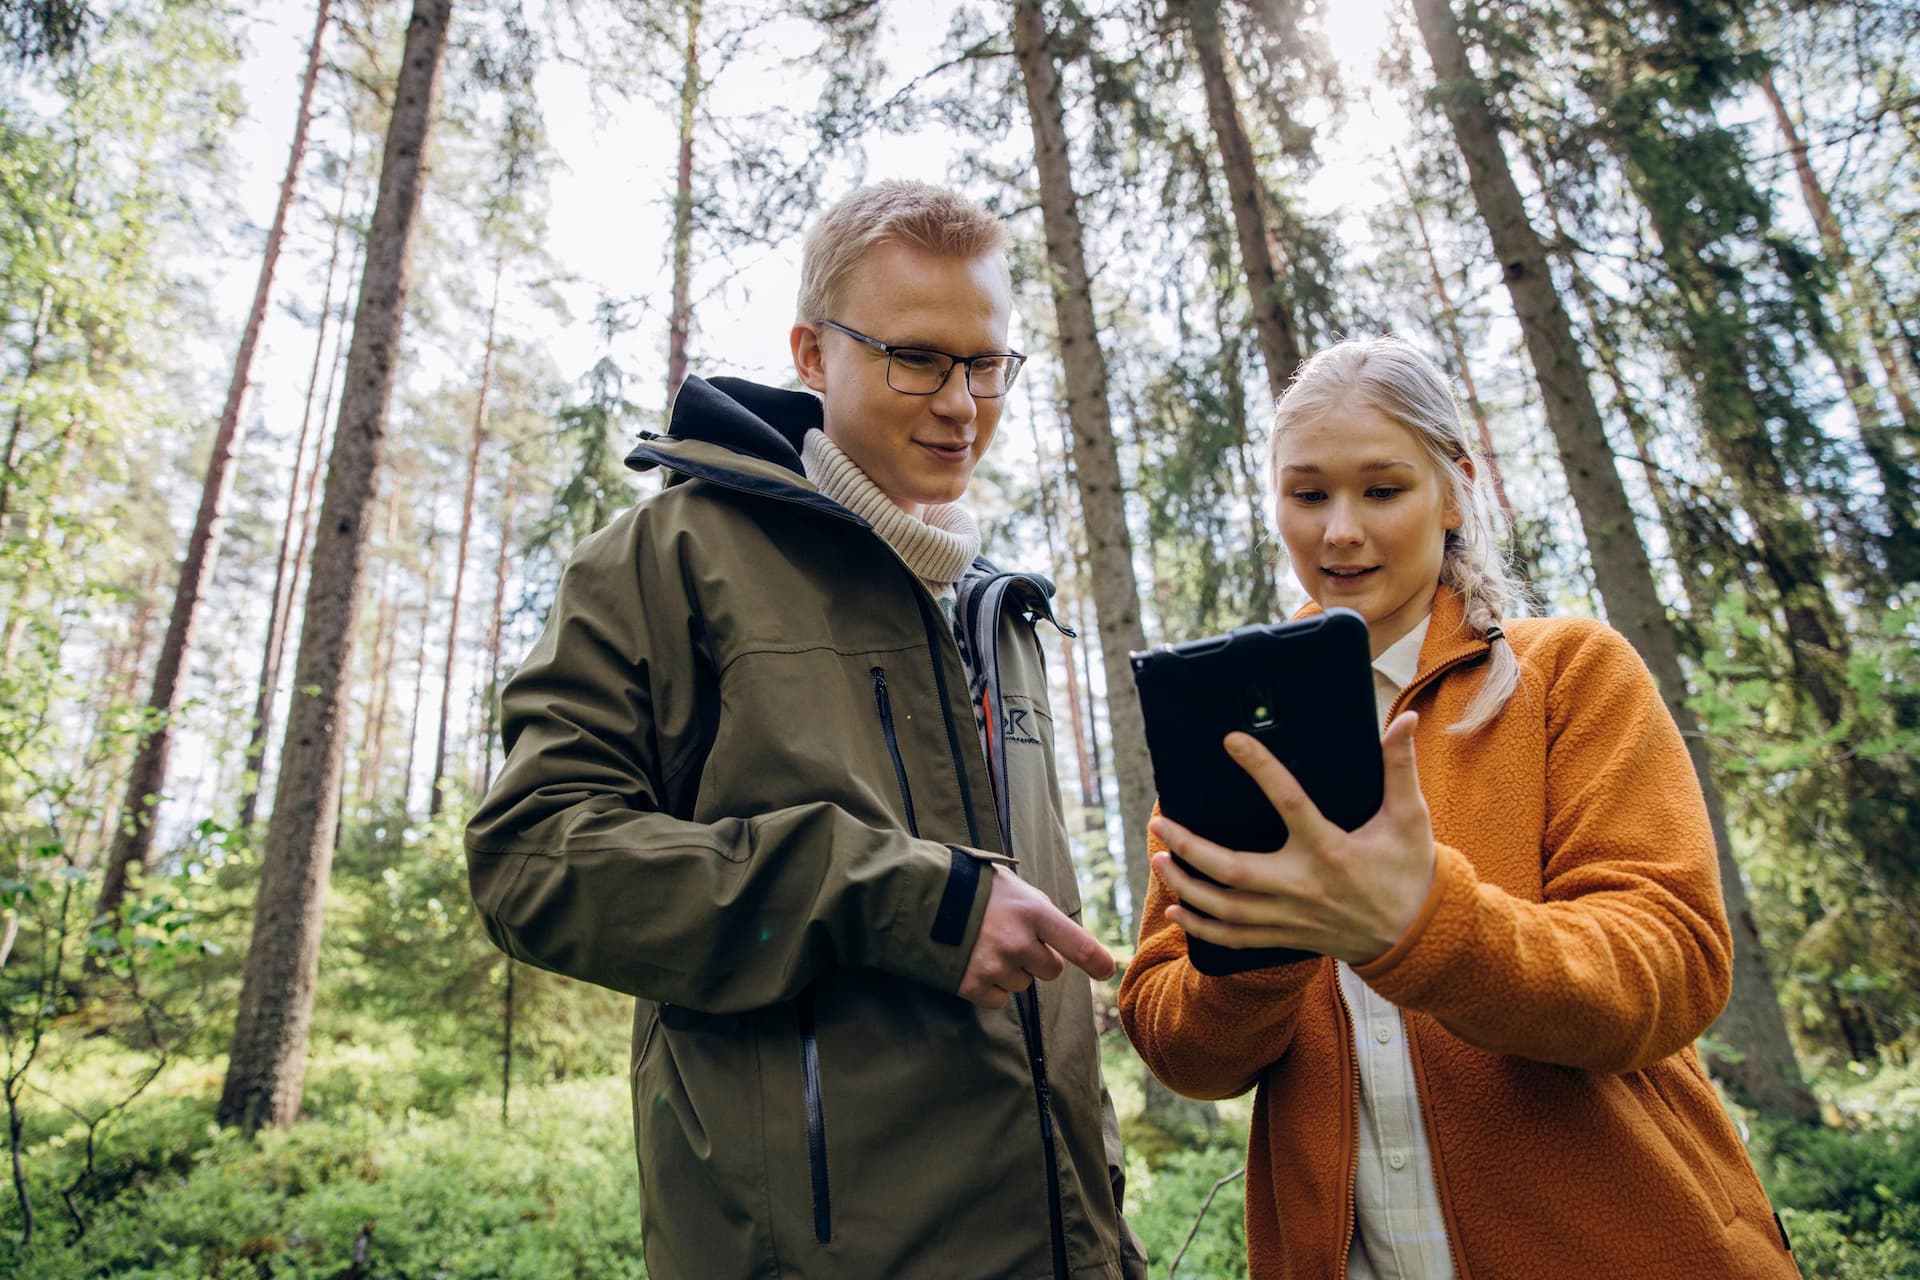 RFI brand photoshoot in Espoo, Finland. Two Environmental Specialists marking their location on a digital map in a forest, Nuuksio National Park.